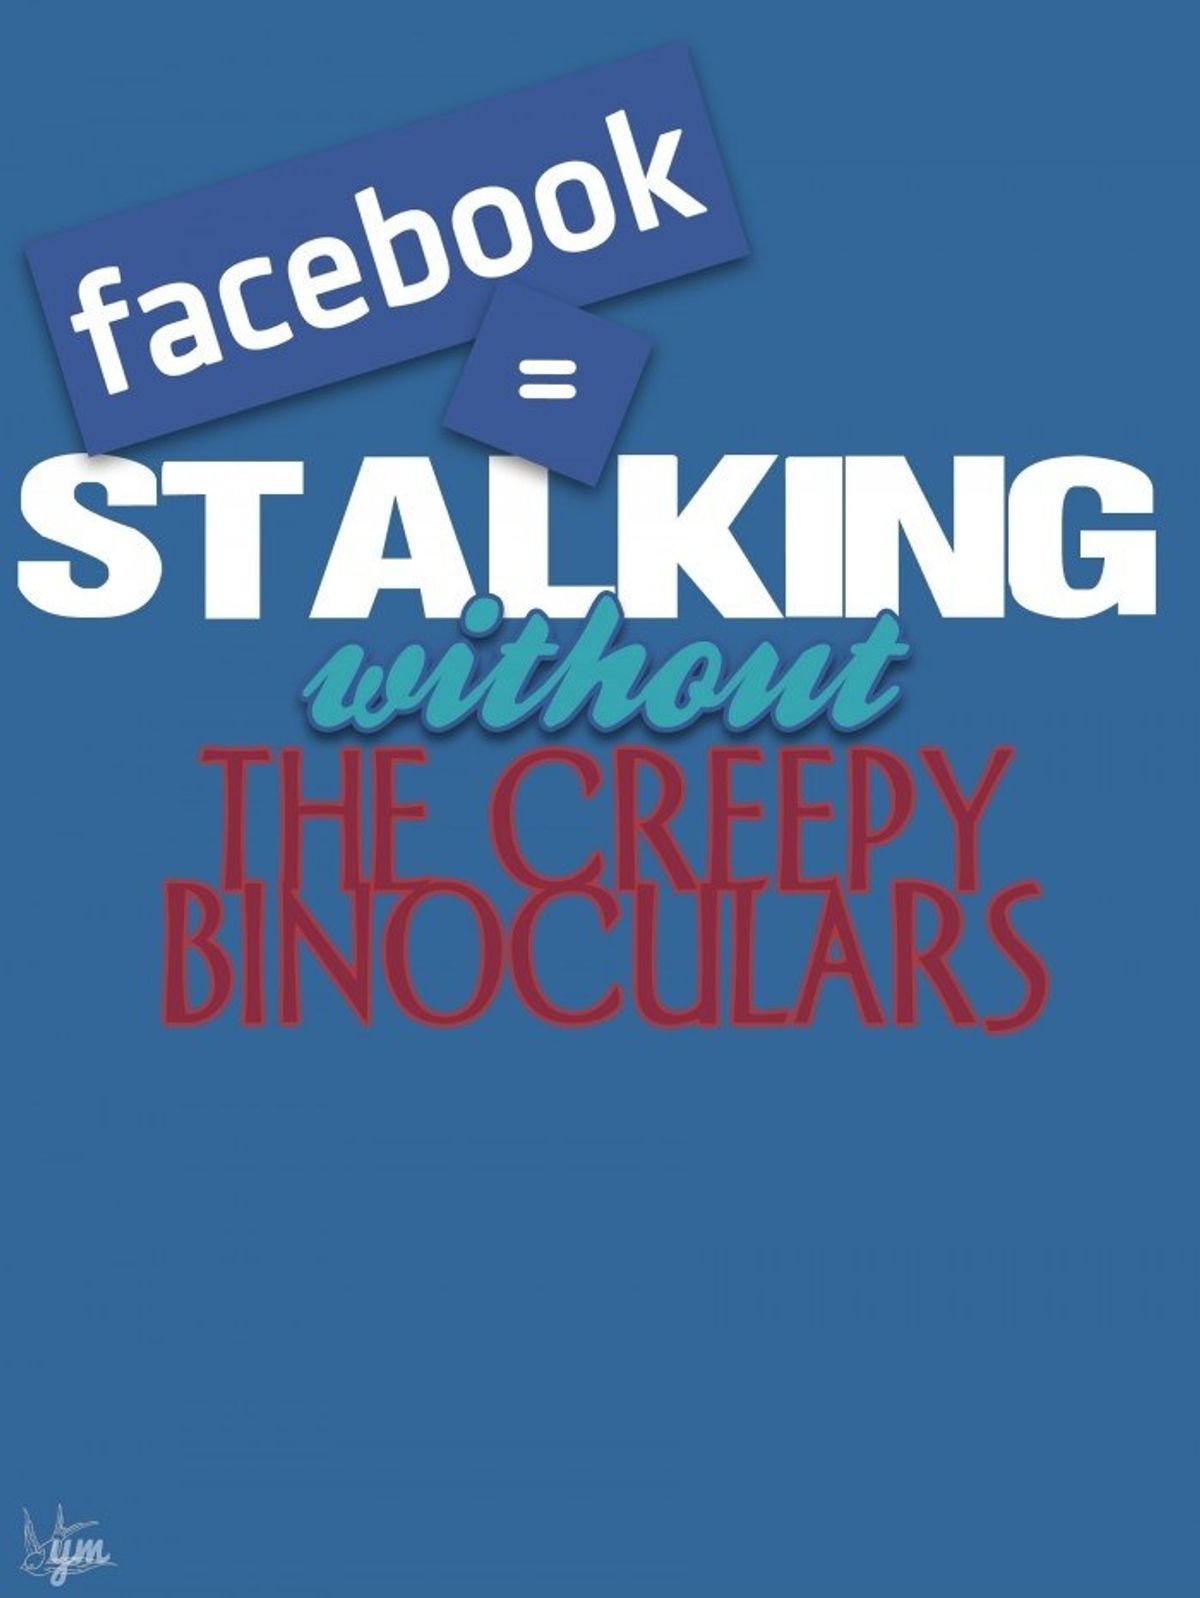 What's Up Facebook Stalkers?